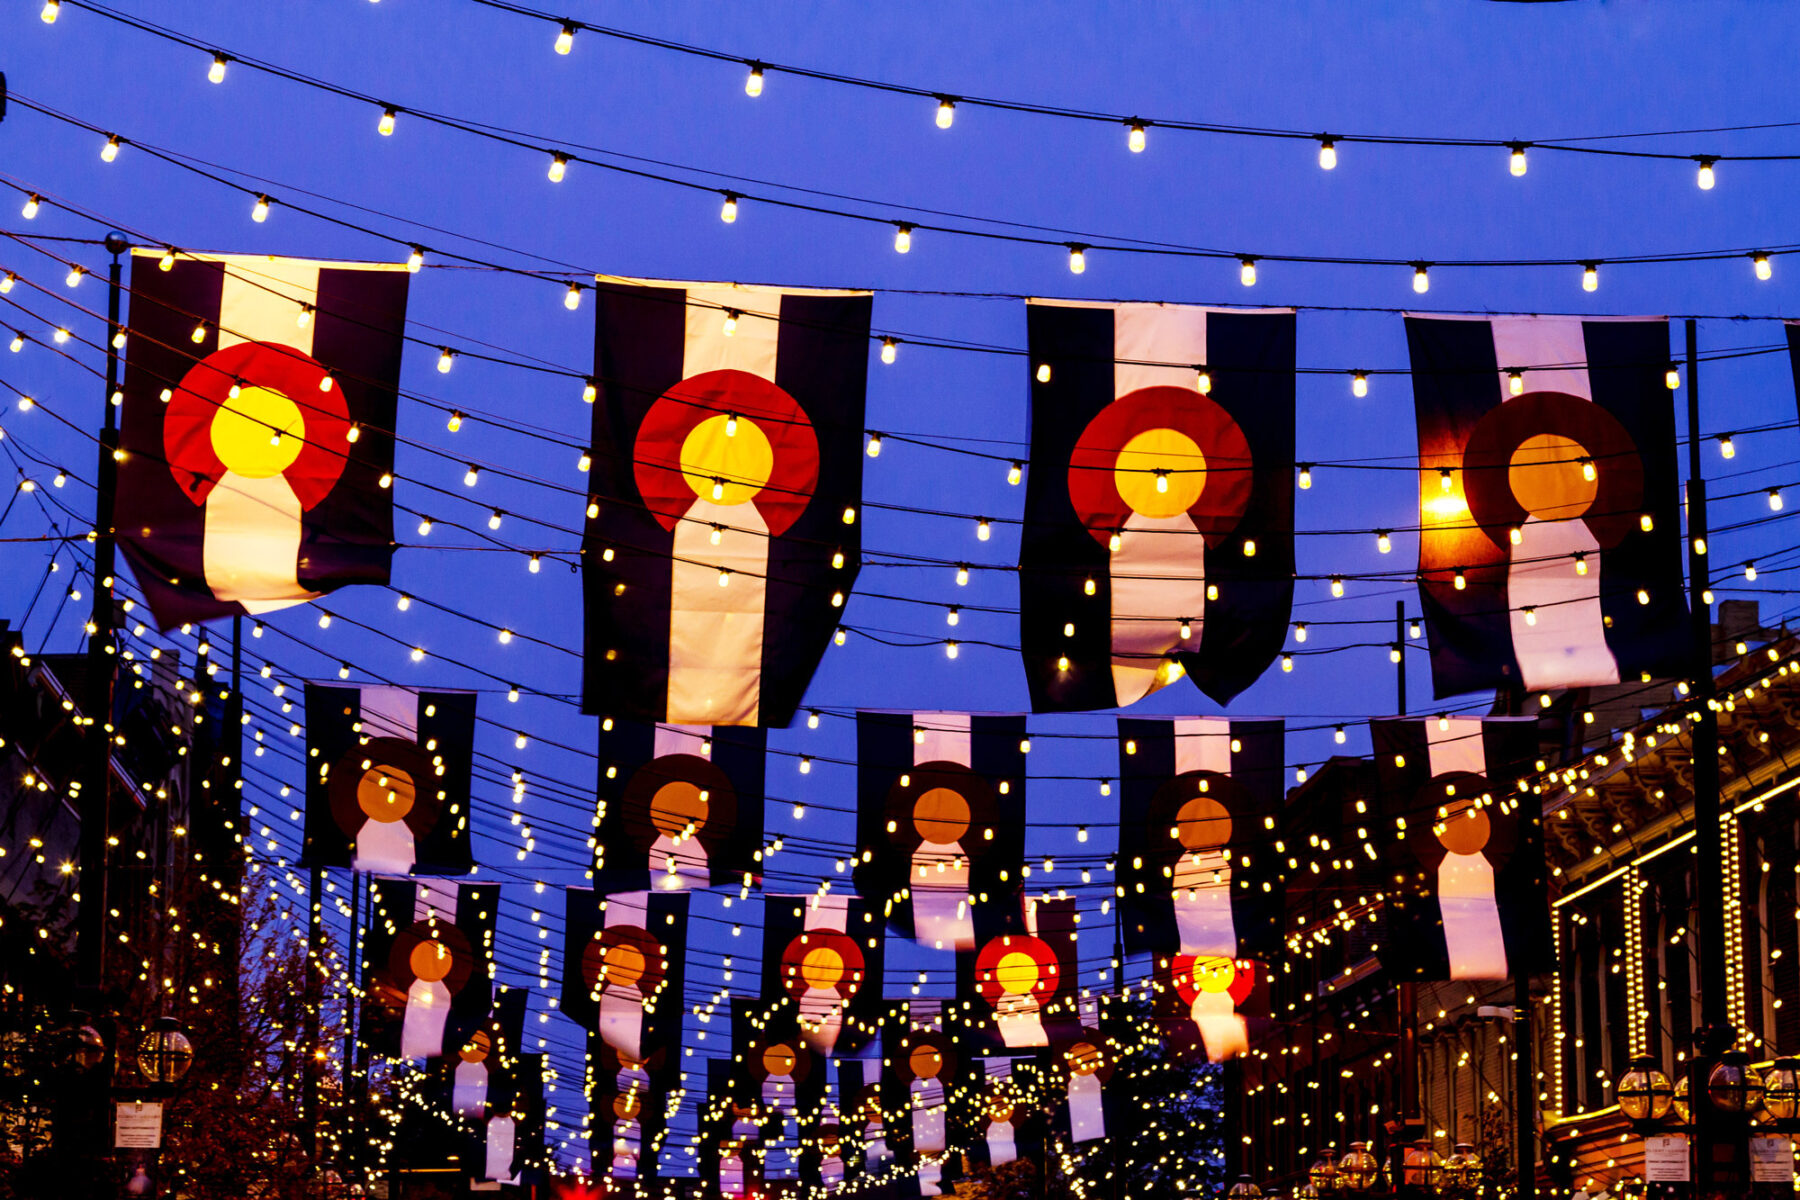 rows of festive street lights with Colorado flags